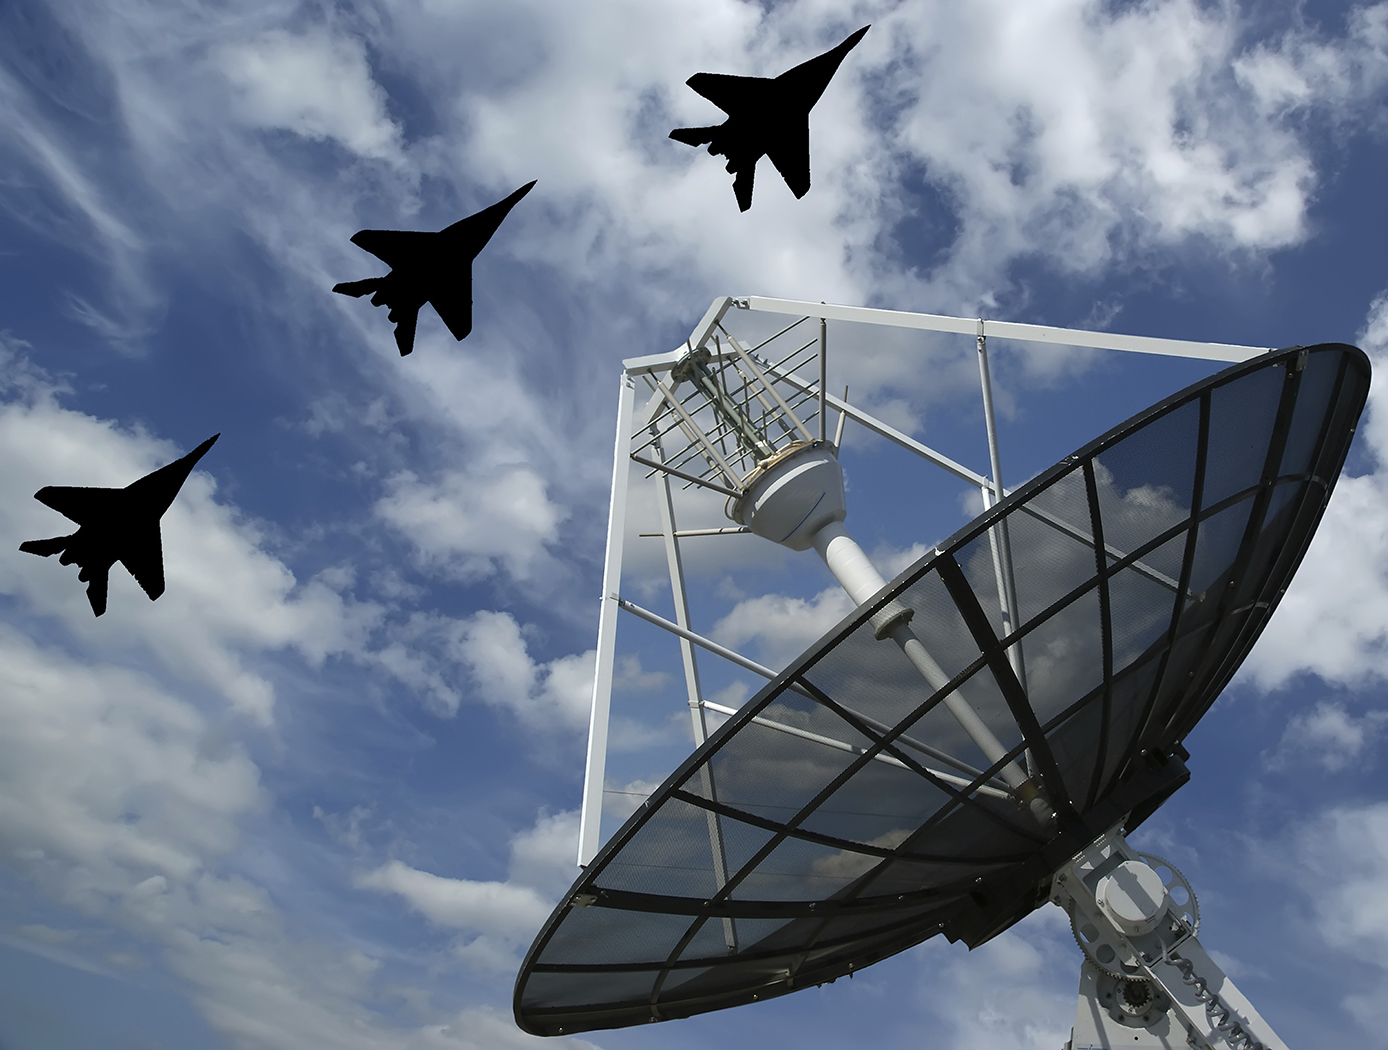 NASA's Solid-State Power Module is ideal for military radar applications.